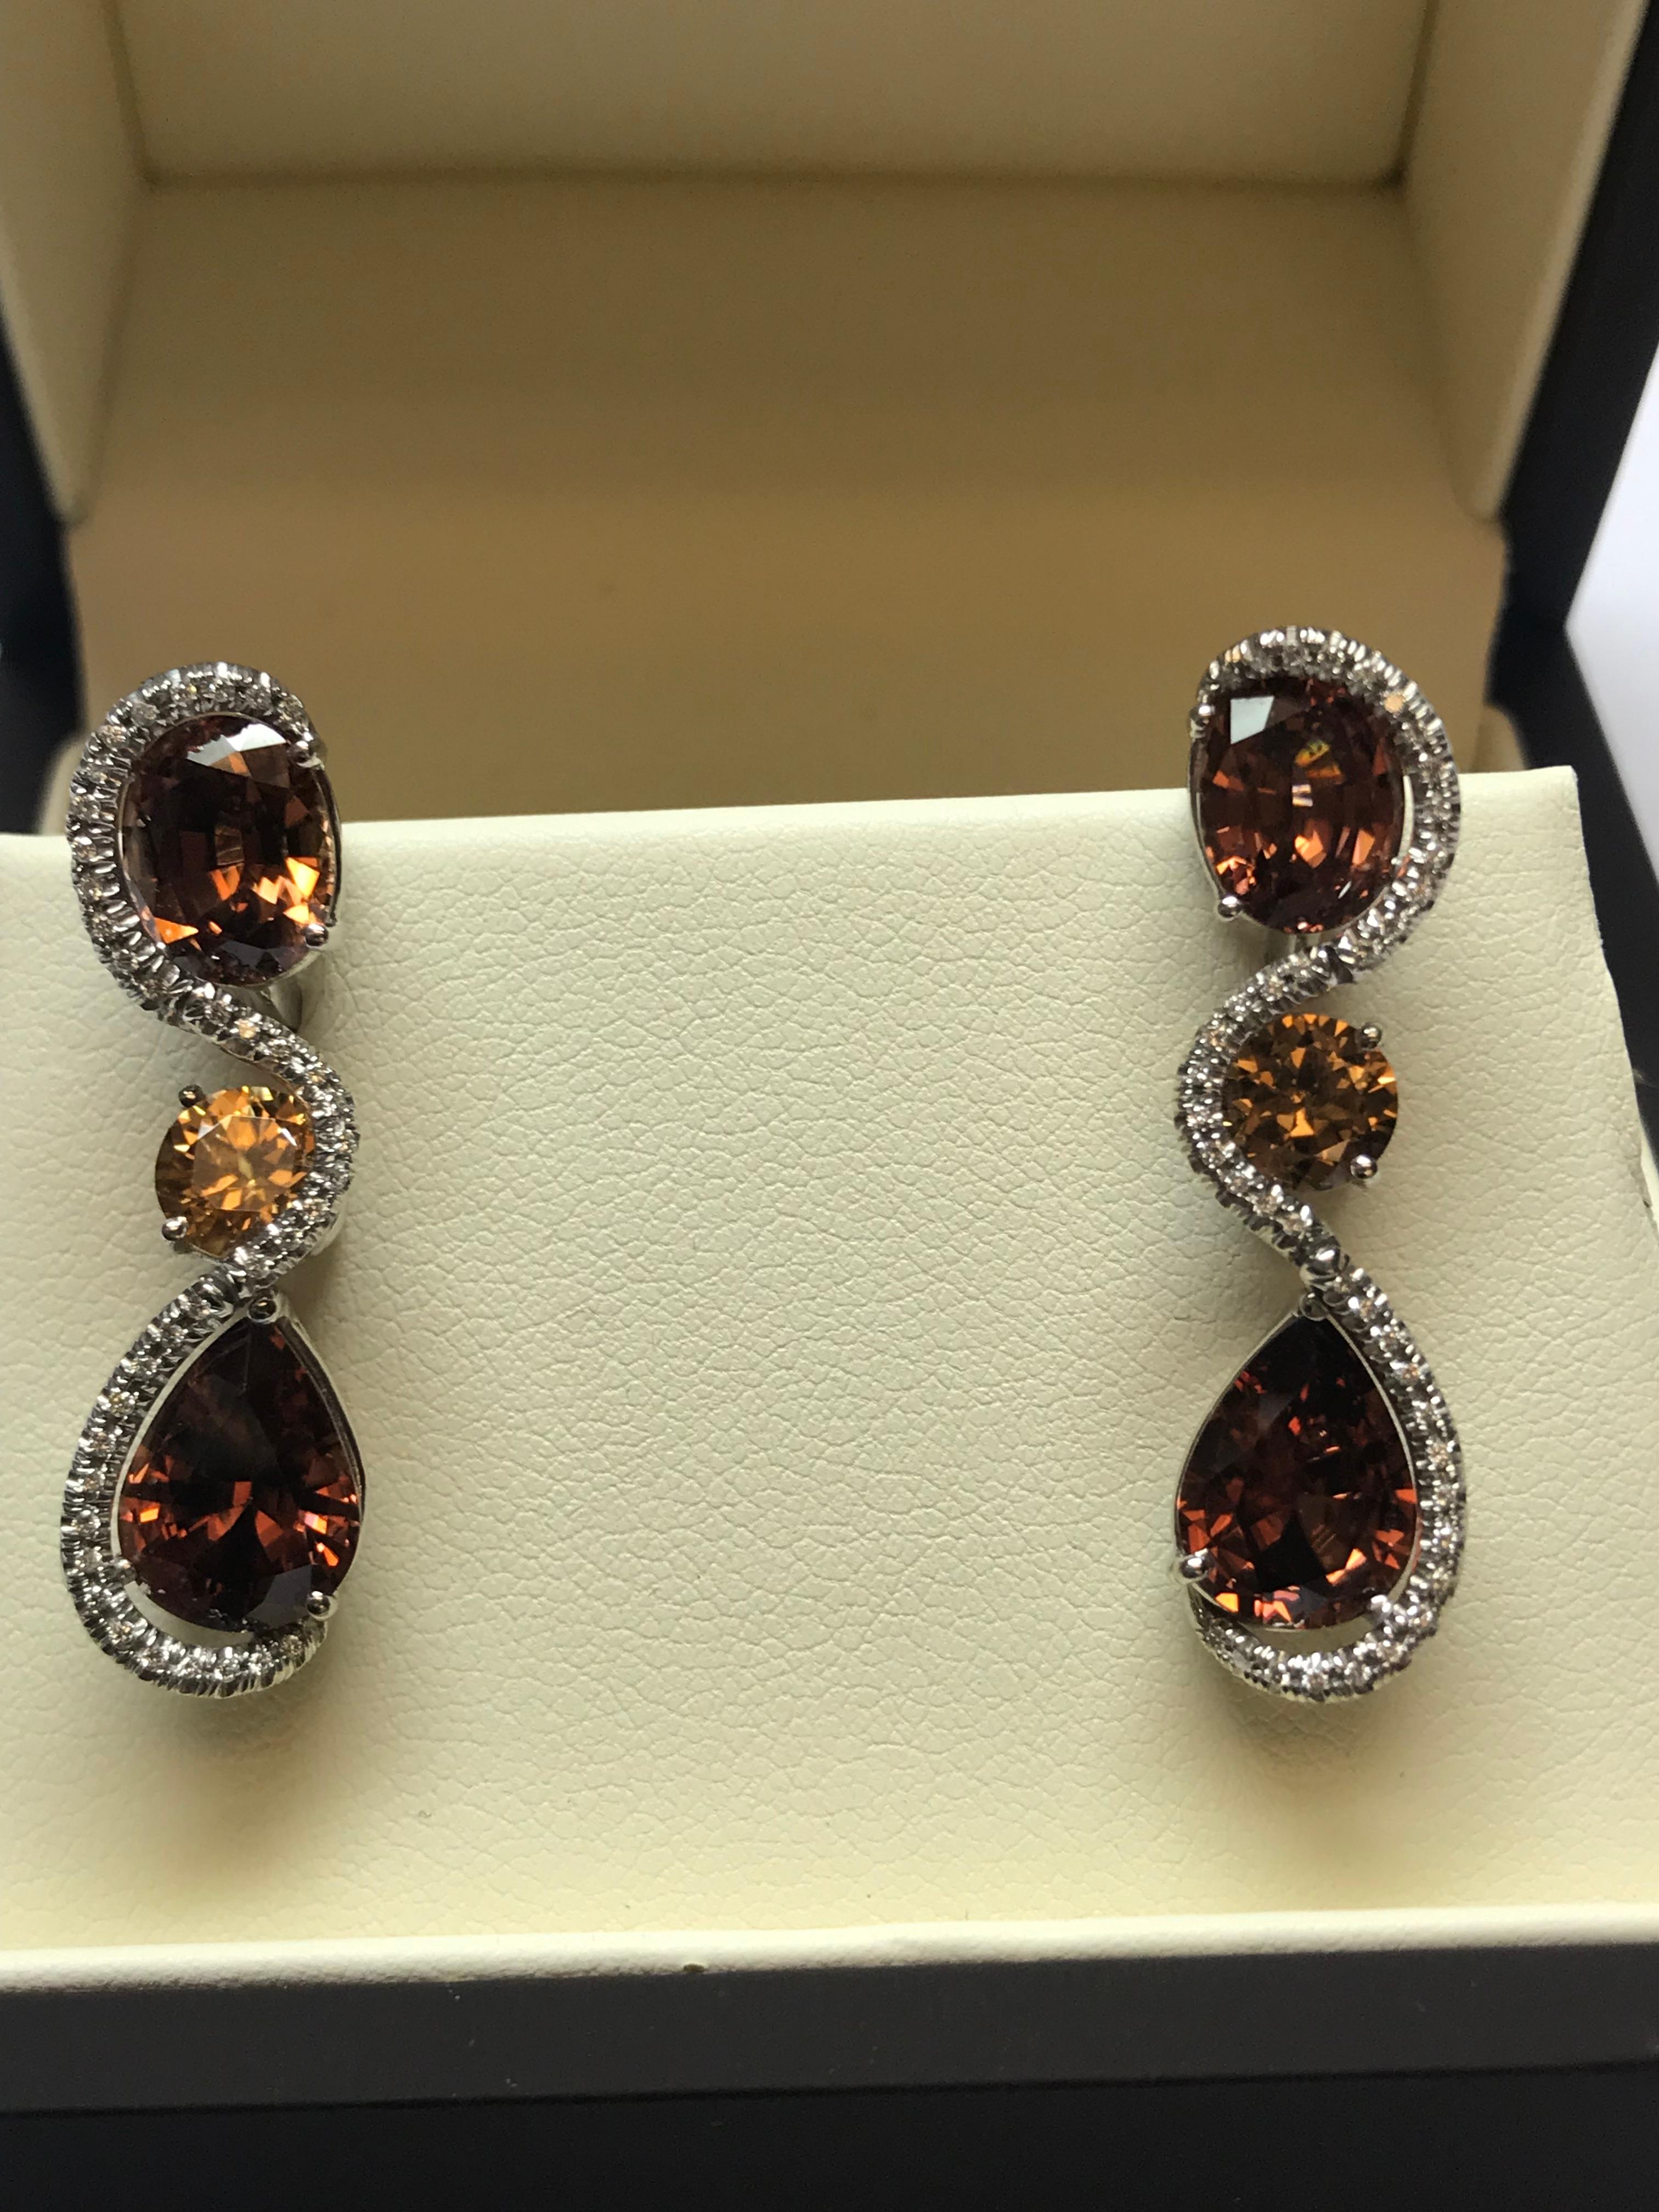 The fire in these very unique colored Tanzanian Zircon earrings surrounded by white diamonds really are a show stopper. The 12.55 carats in total weight of oval, round and pear shaped Zircons are accented perfectly with diamonds and the design of